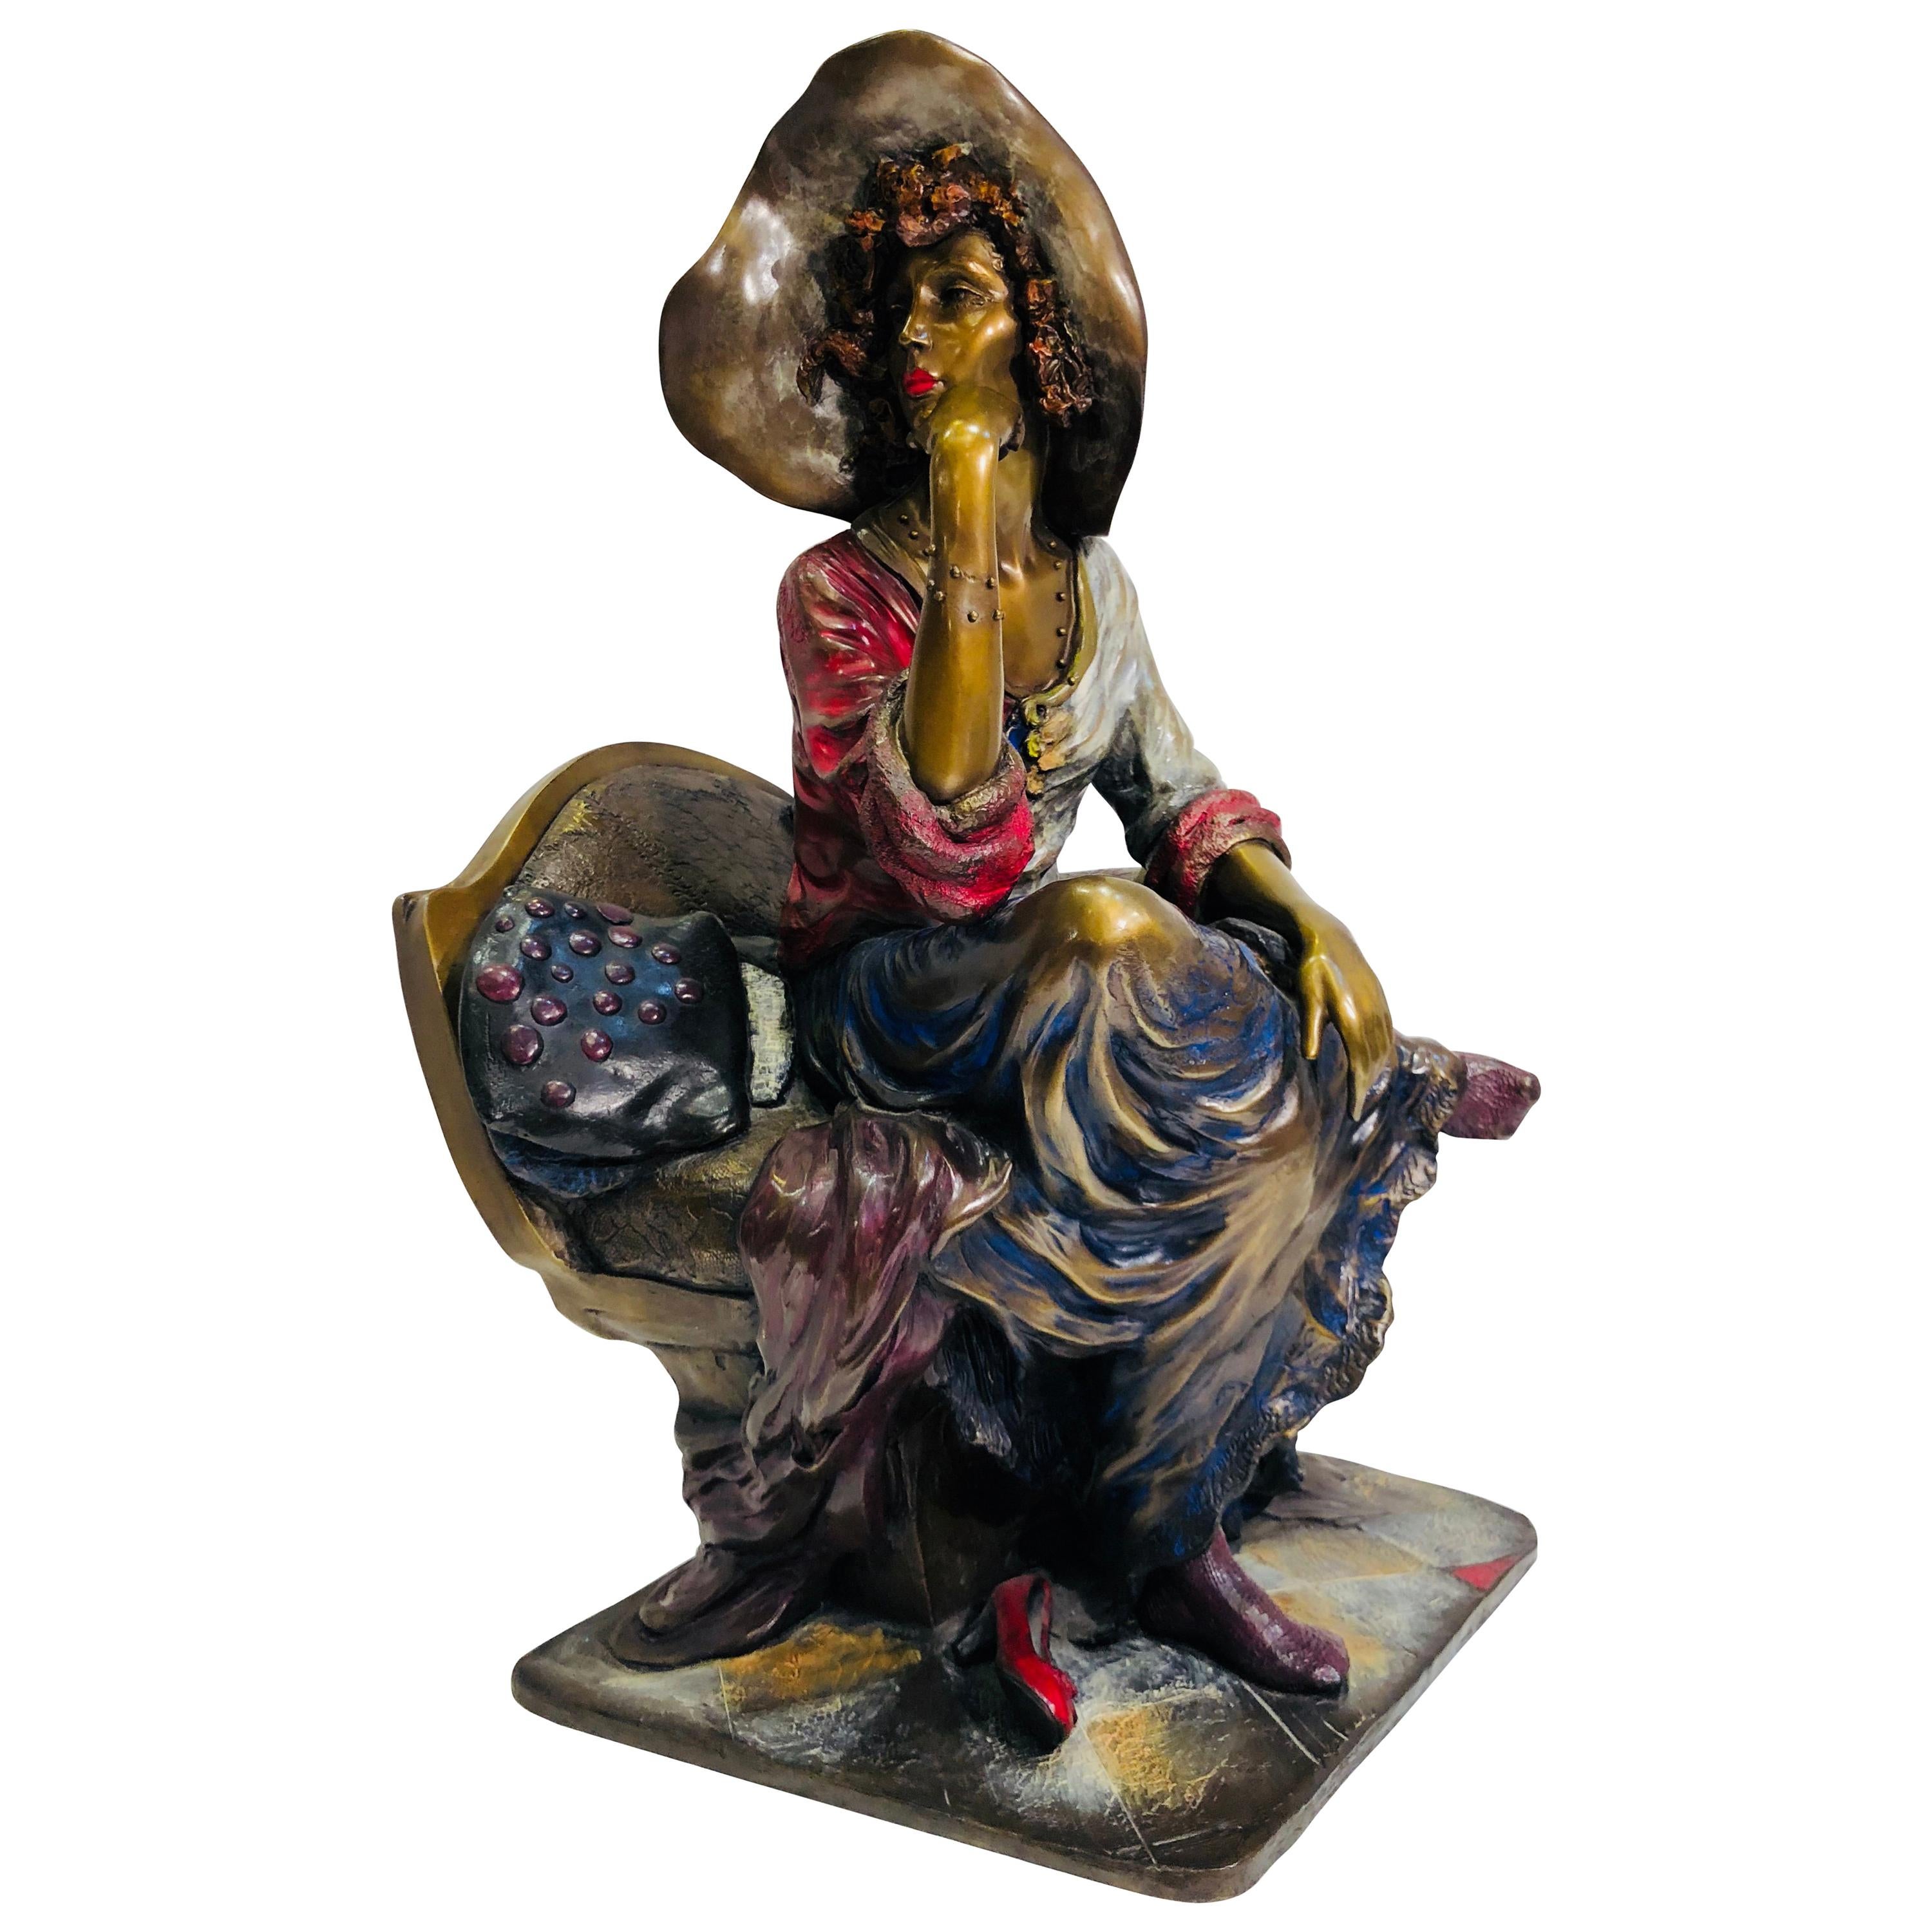 Original Isaac Maimon Bronze Polychrome Sculpture "At the Ball" Limited Edition